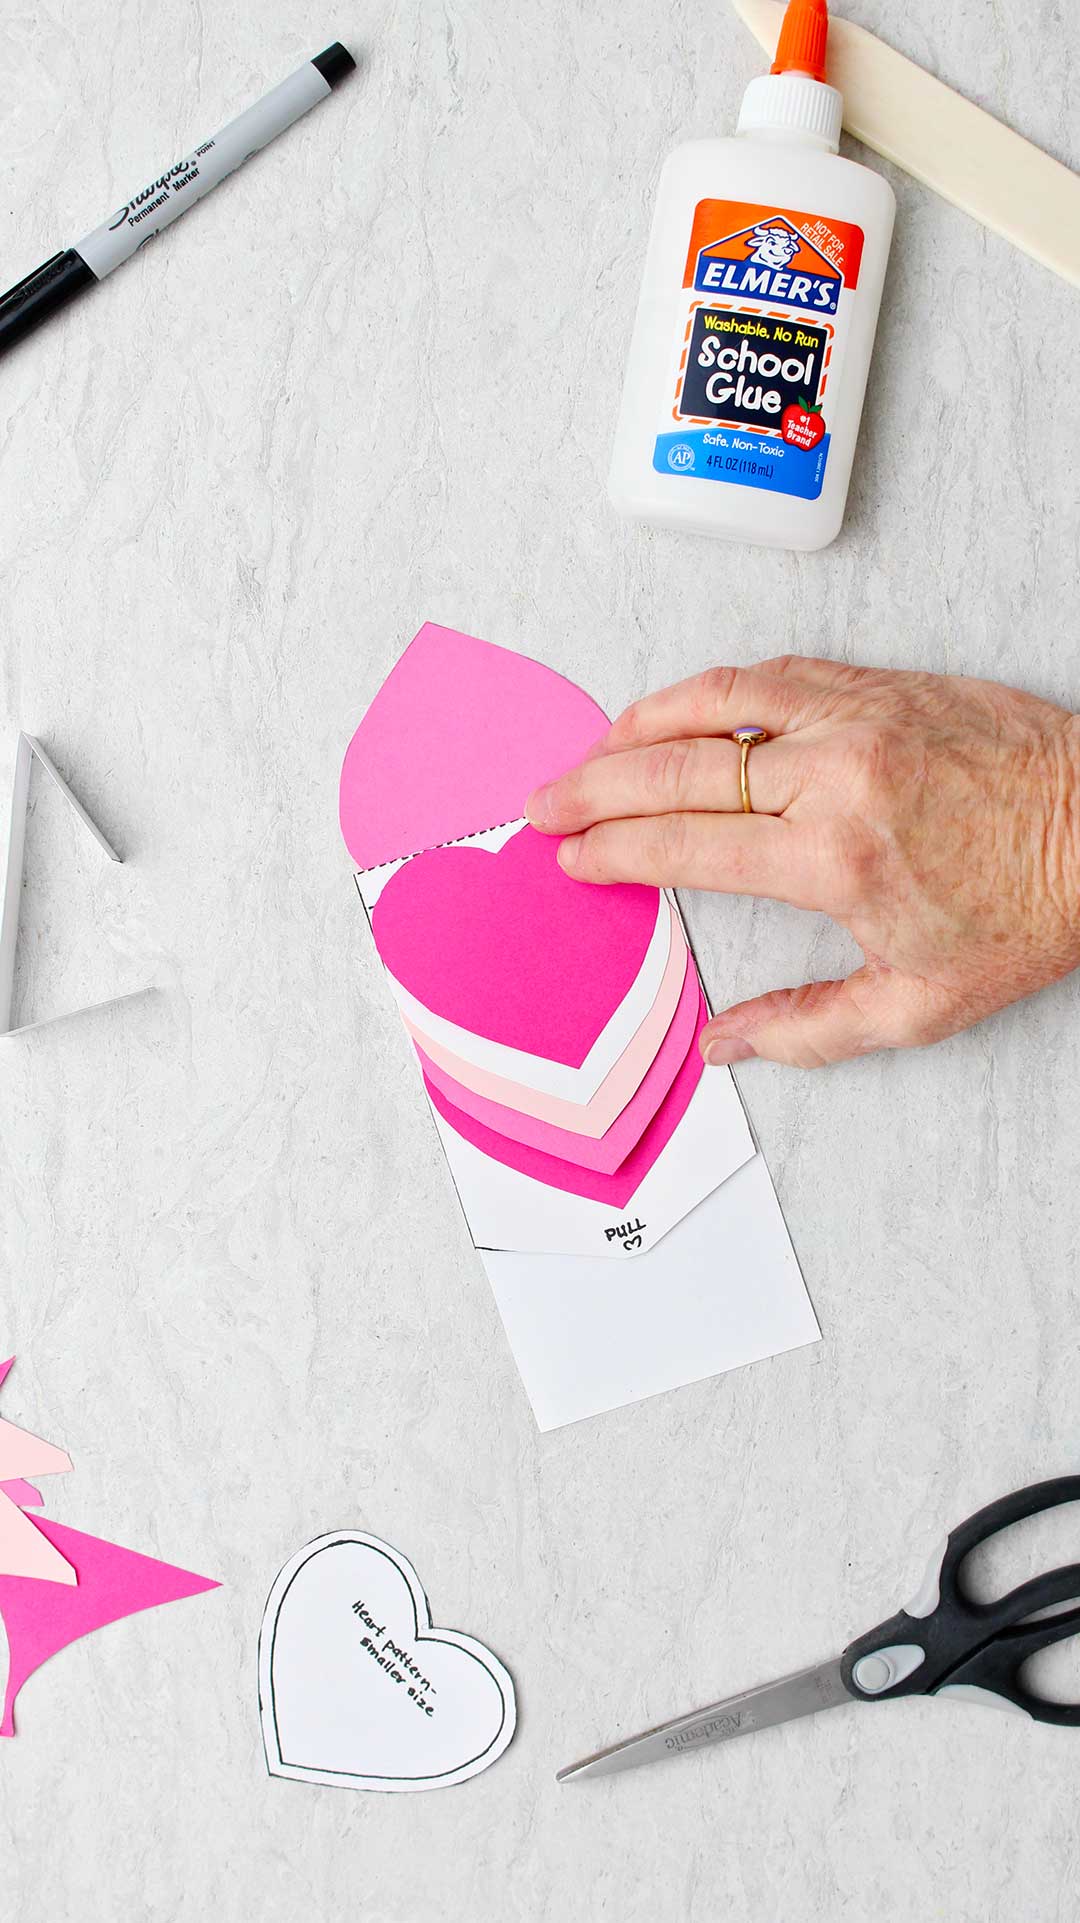 Hand pressing down on bright pink heart to secure it to the card.